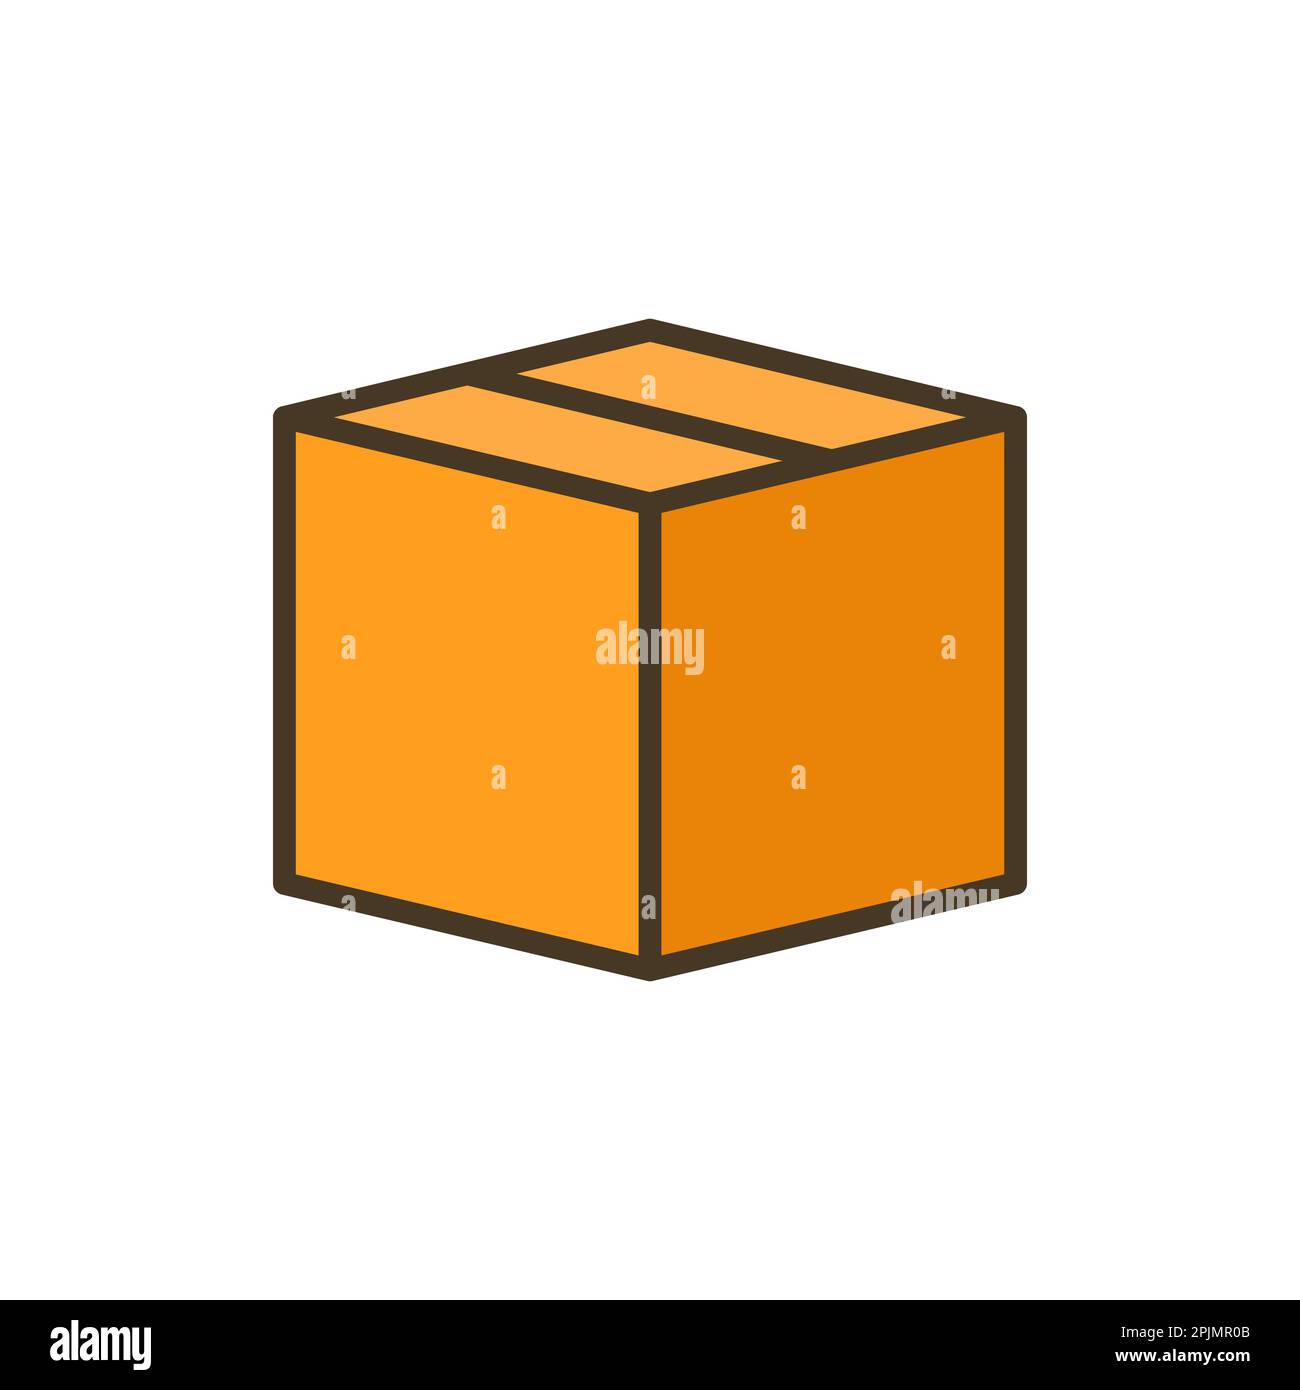 Shipping, delivery, package box or container icon. Cargo container symbol. Open boxes. Applicable for post, delivery, gift illustration. Vector illust Stock Vector